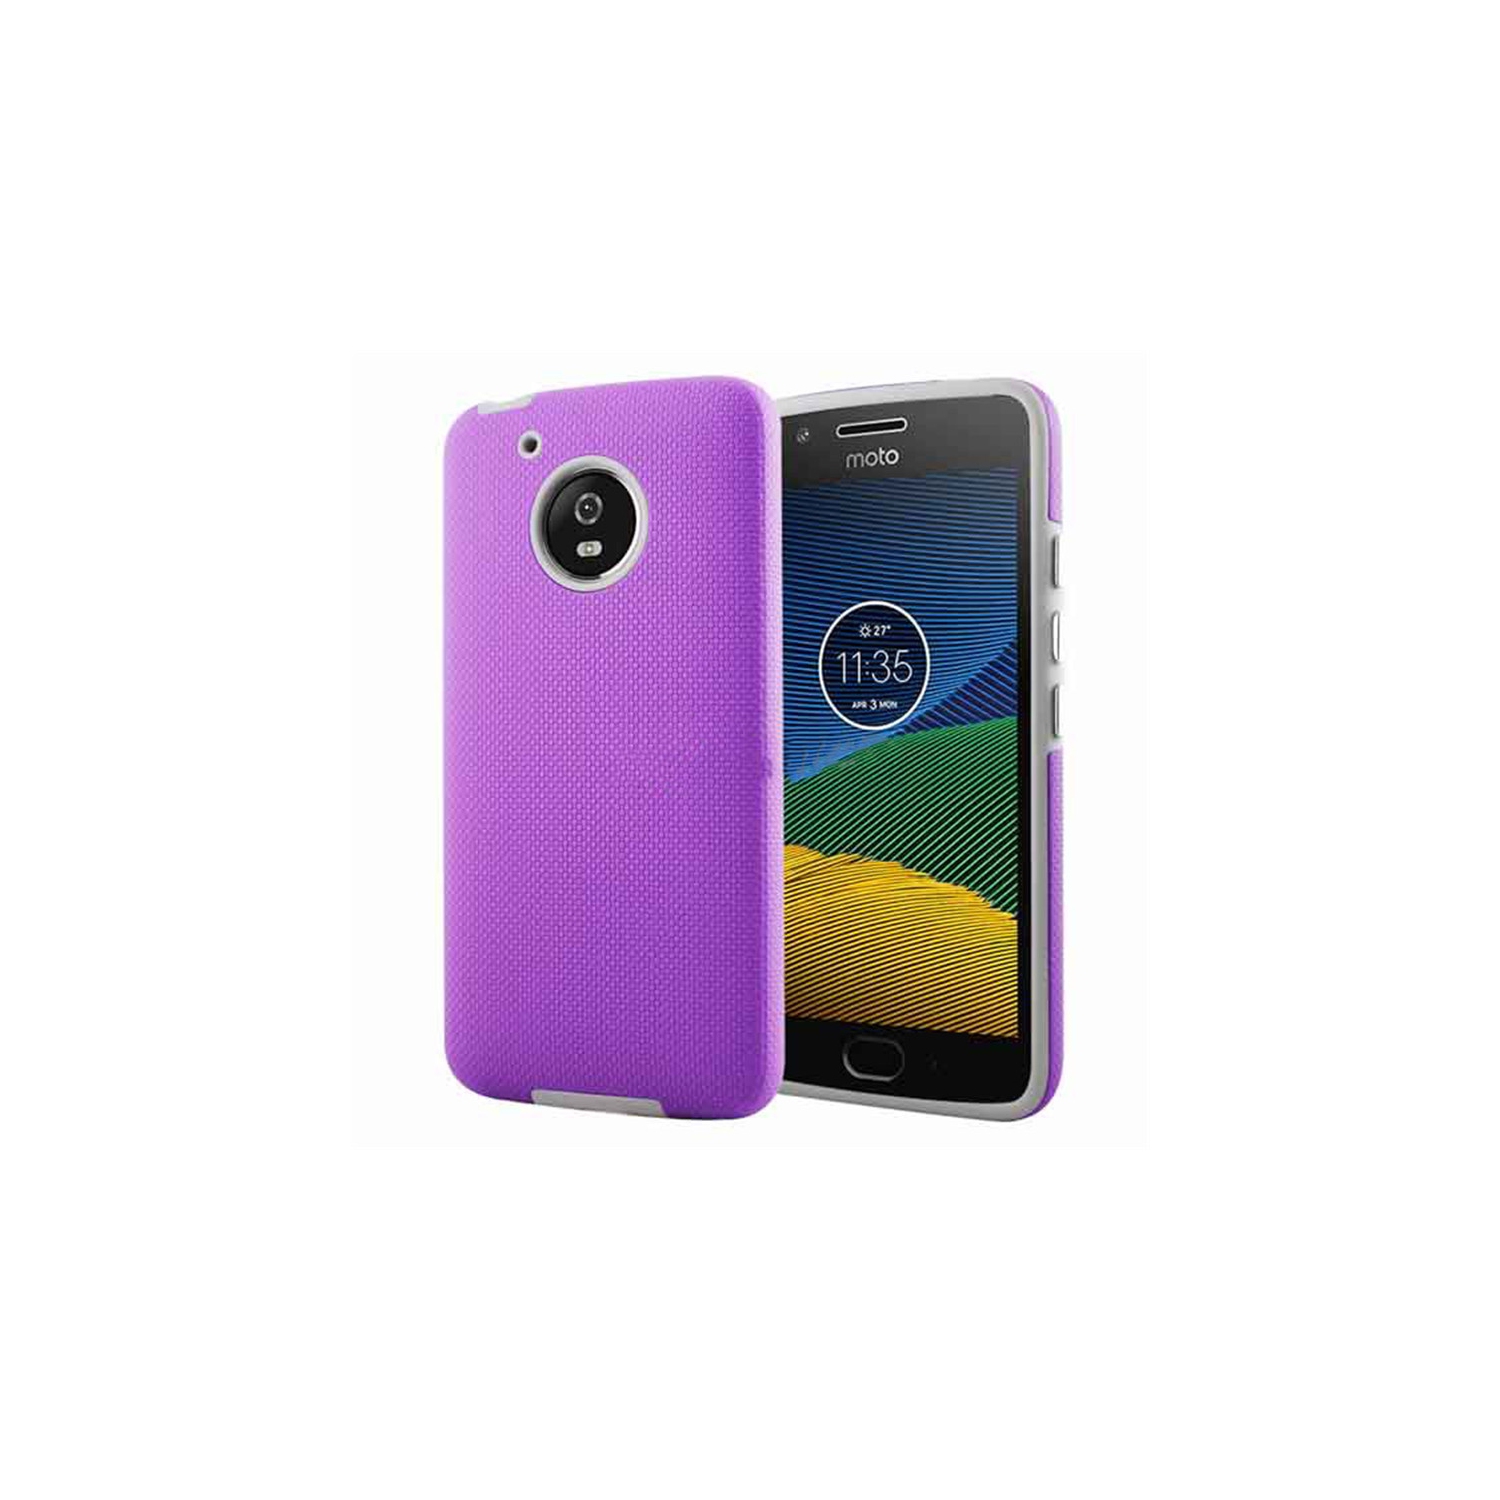 【CSmart】 Slim Fitted Hybrid Hard PC Shell Shockproof Scratch Resistant Case Cover for Motorola Moto Z3 Play, Purple